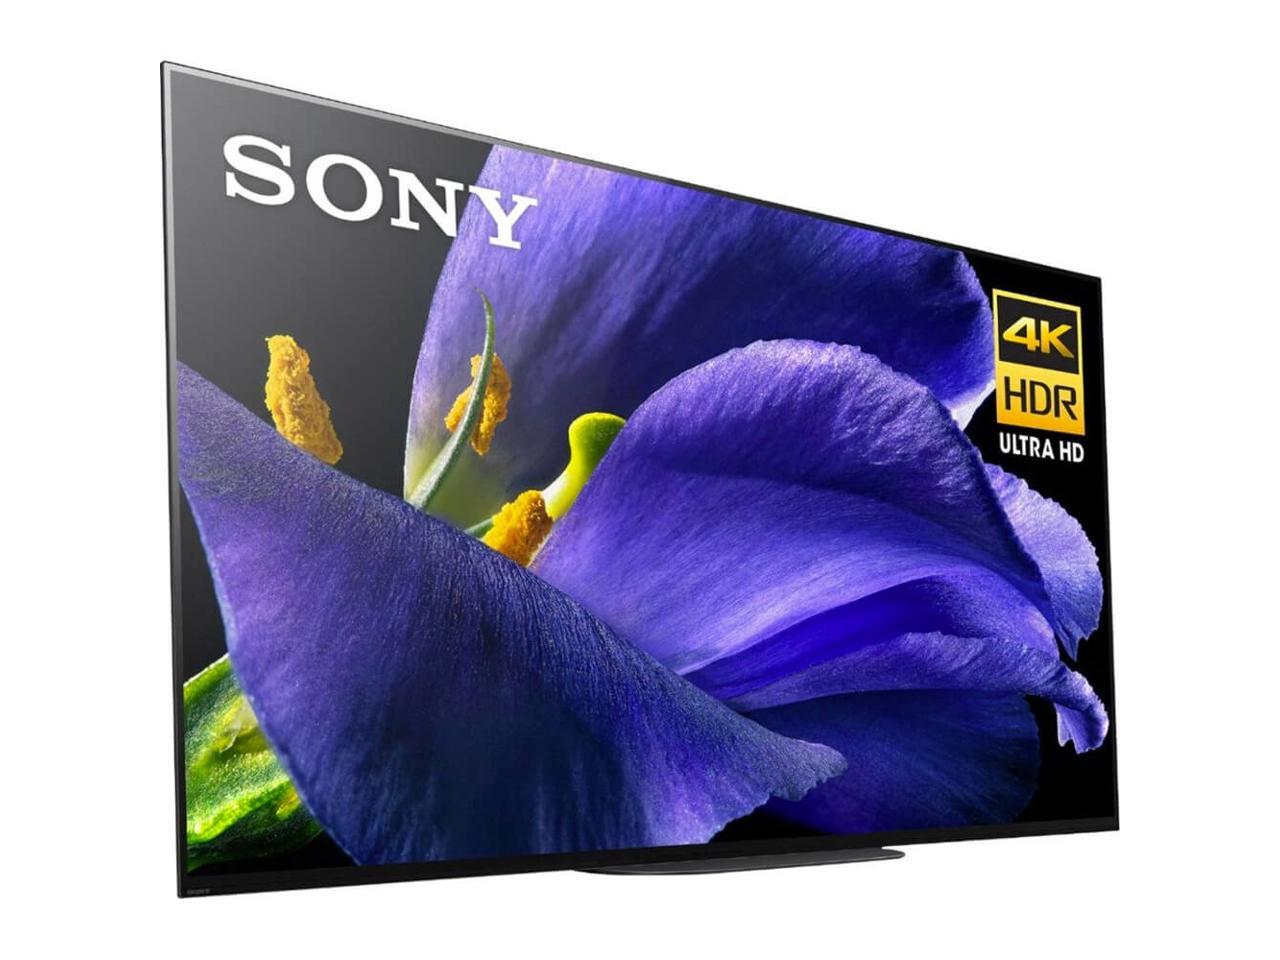 Sony XBR55A9G 55" BRAVIA OLED 4K UHD Smart TV with HDR